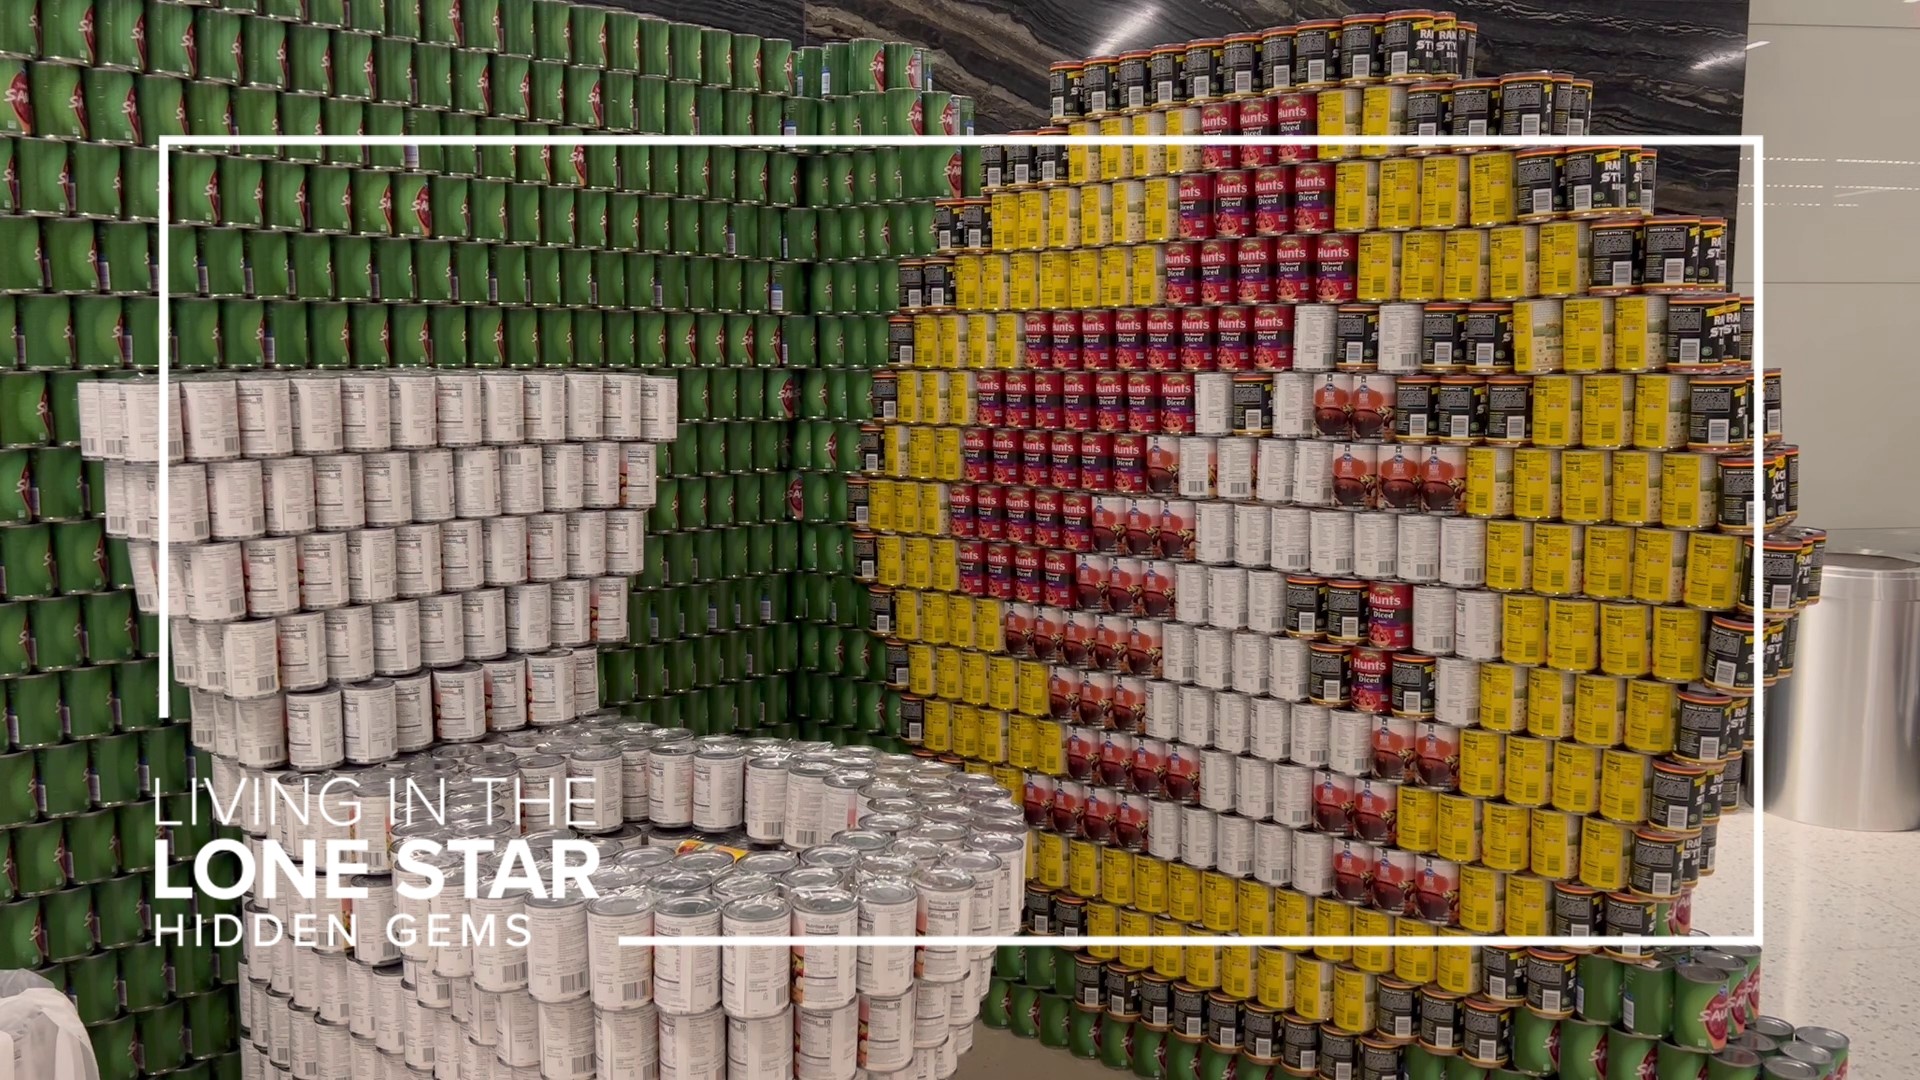 Through Nov. 12, you can vote which Canstruction Houston creation earns the People's Choice Award.